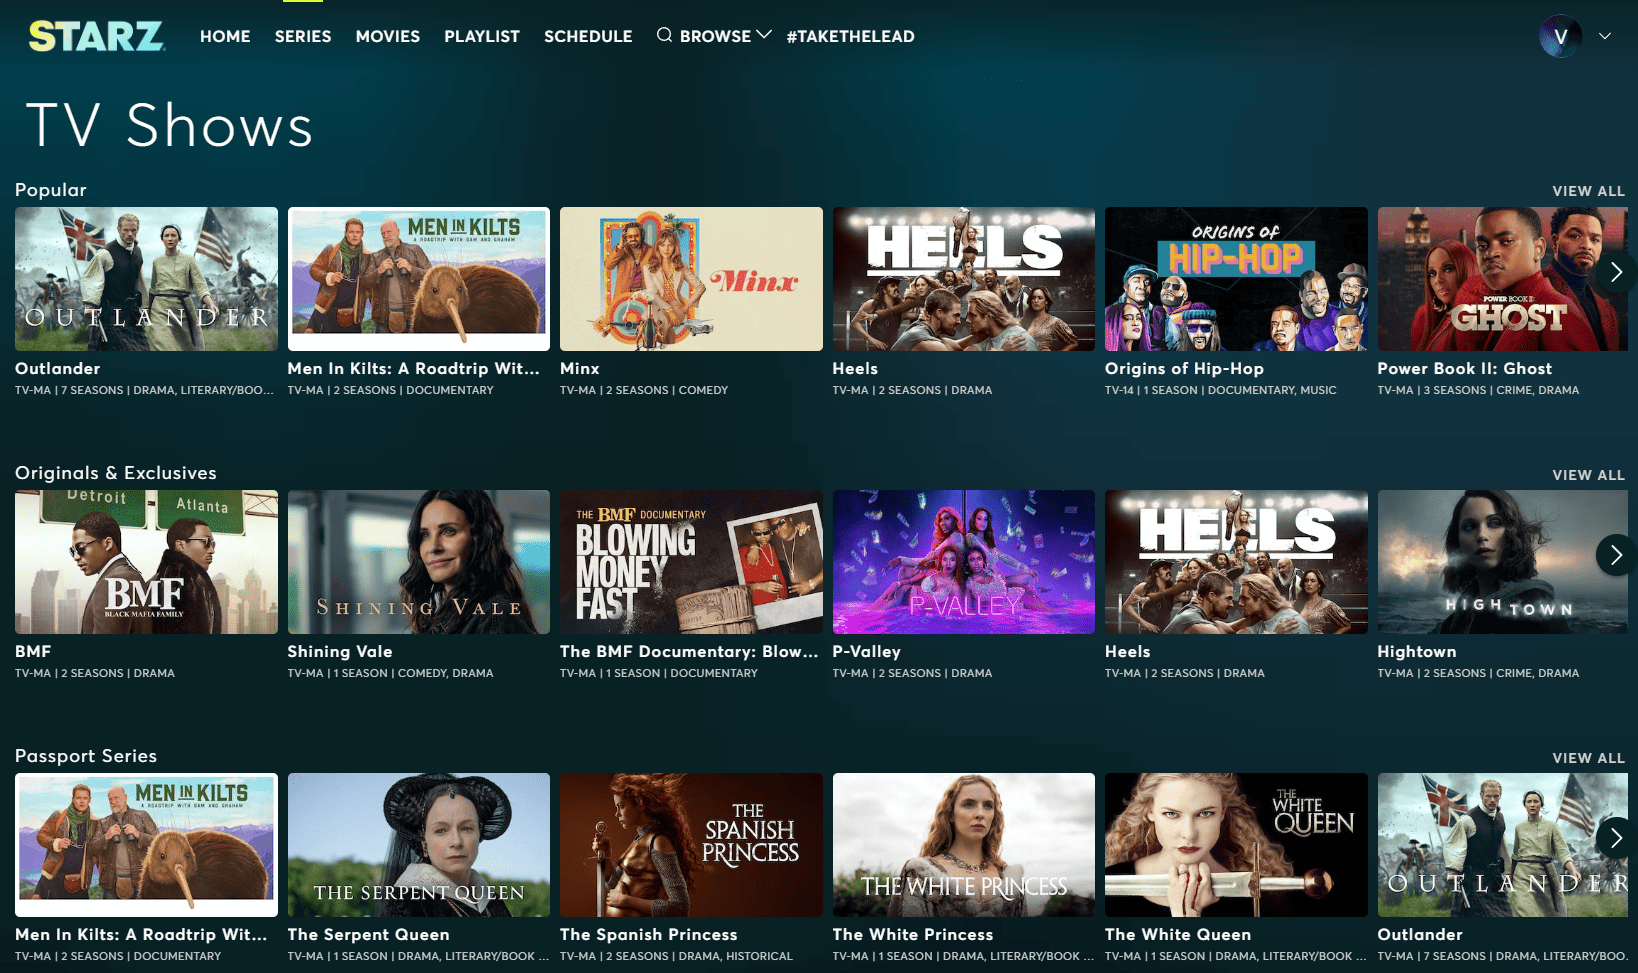 A screenshot of various TV shows under the “Series” tab on STARZ